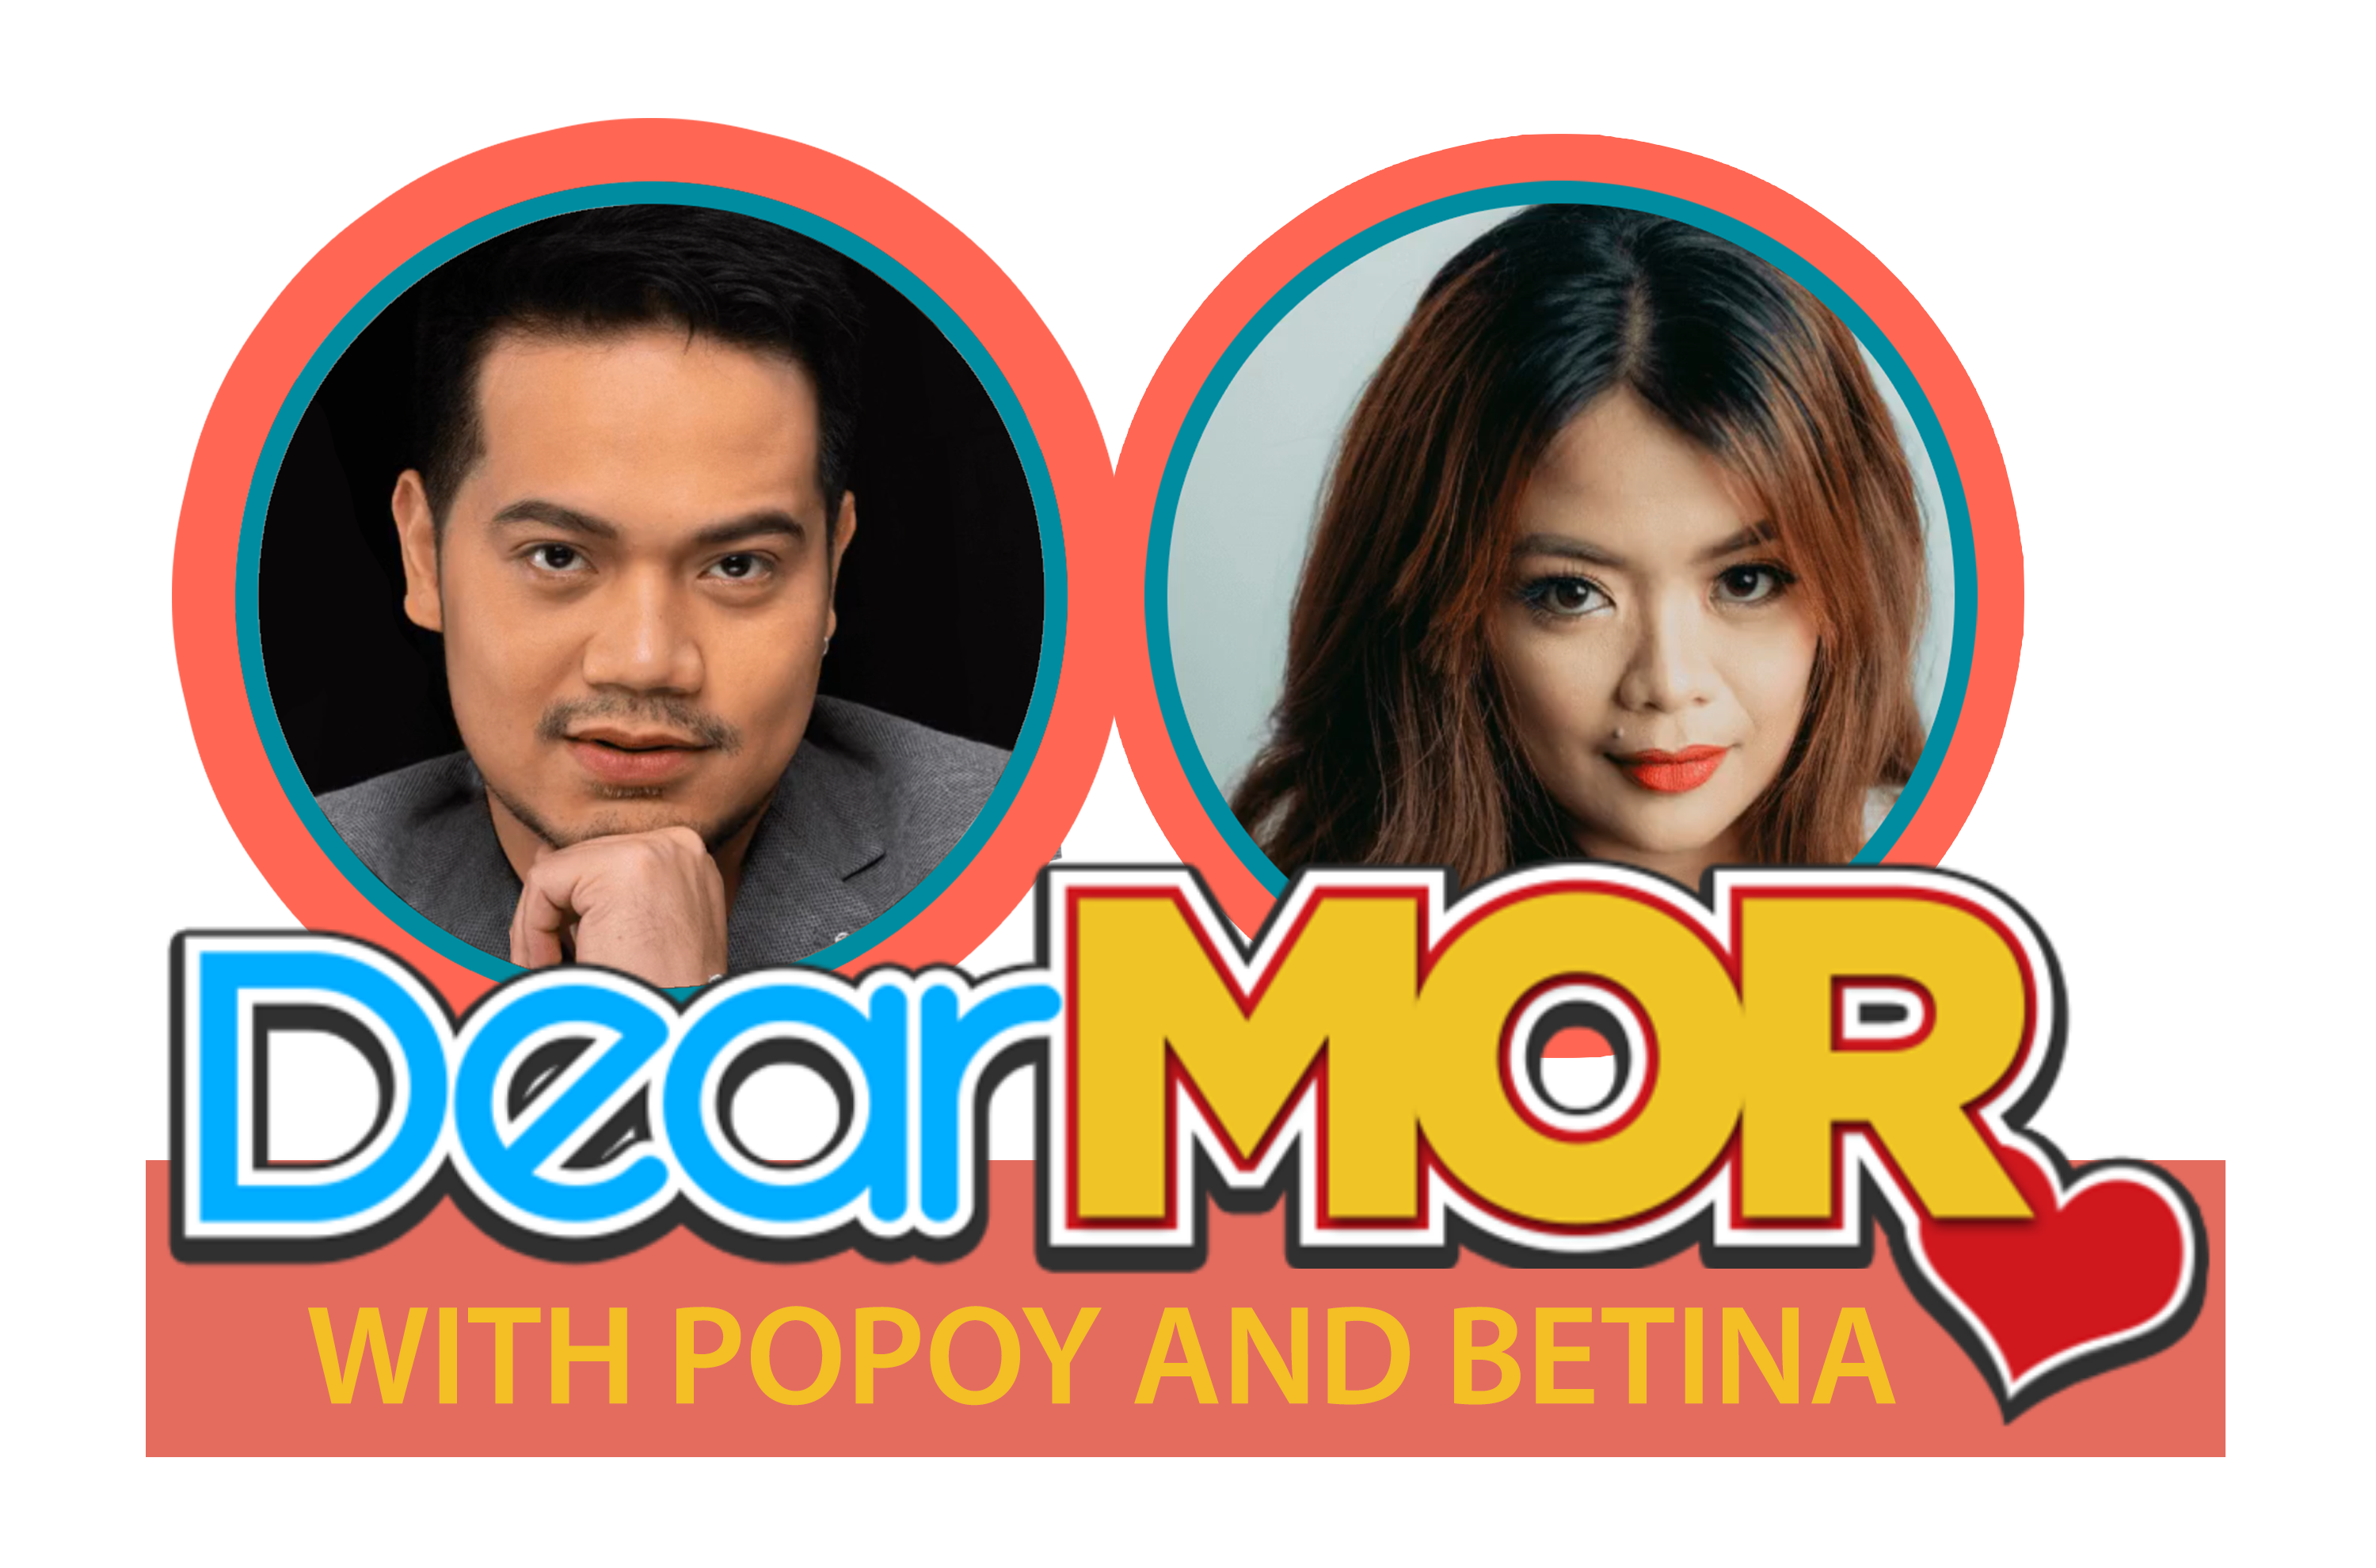 5 true stories of love and life to muse over from "Dear MOR"